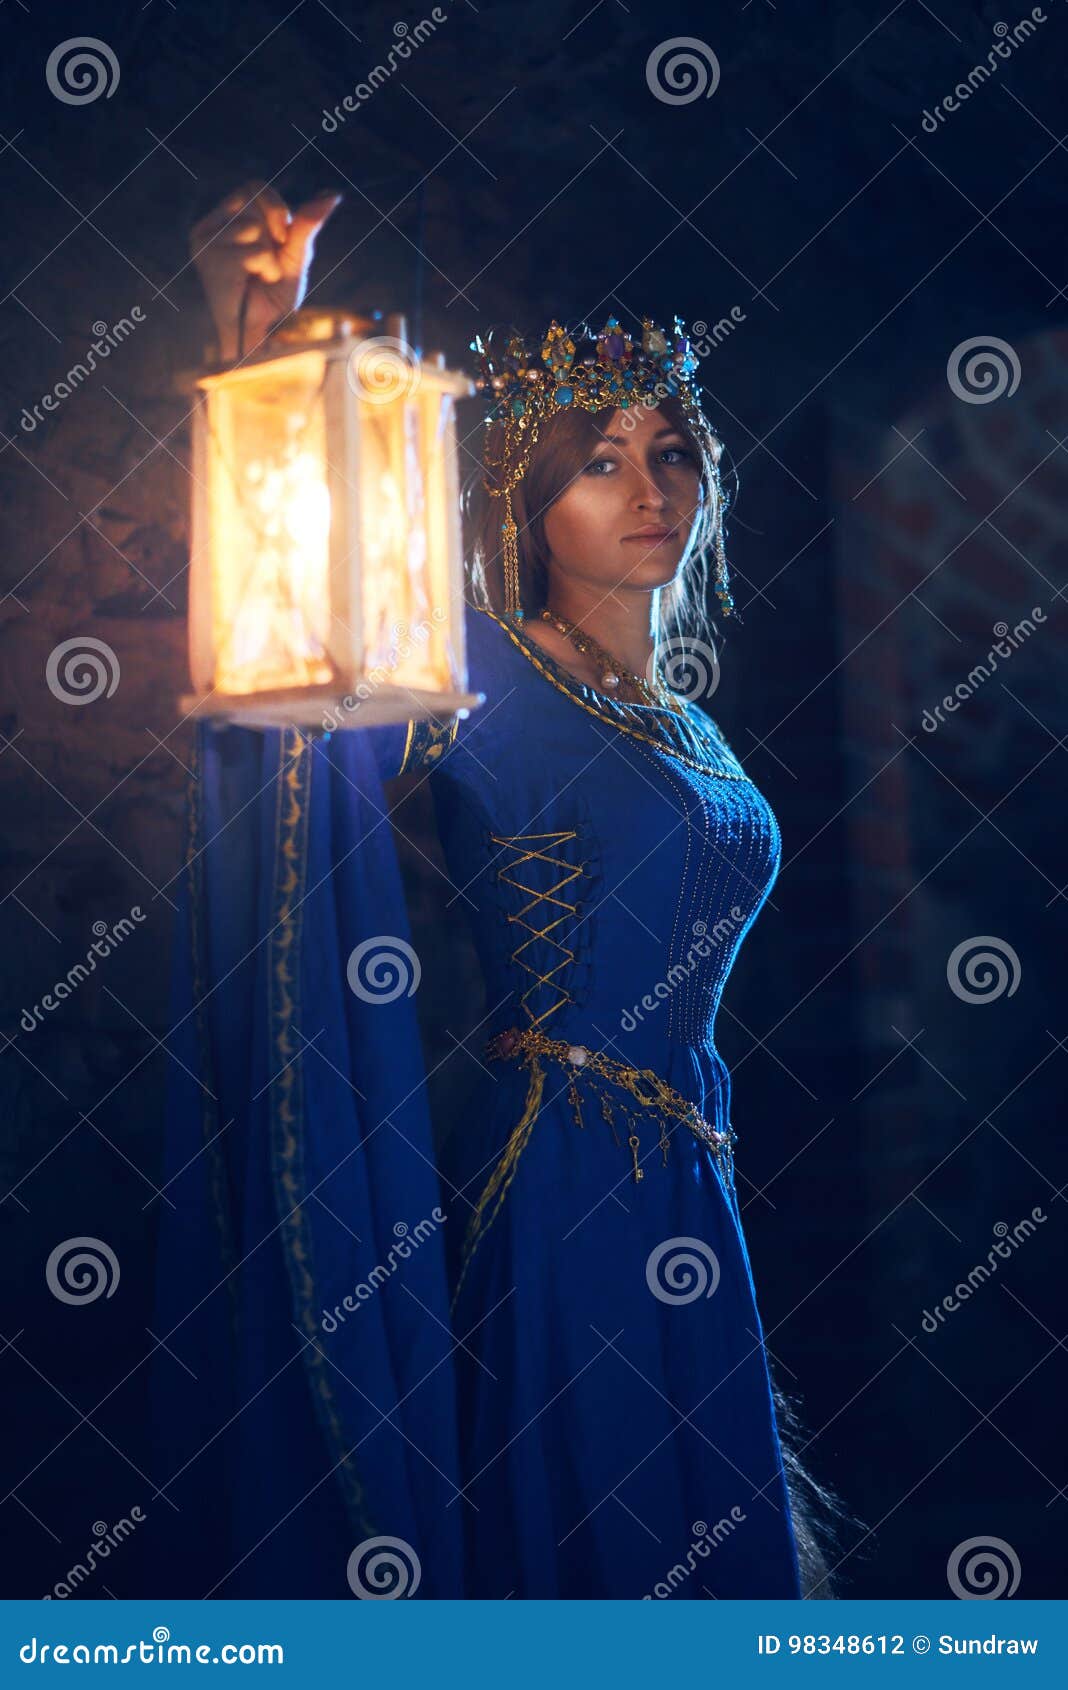 beautiful eleanor of aquitaine, duchess and queen of england and france on high middle ages.